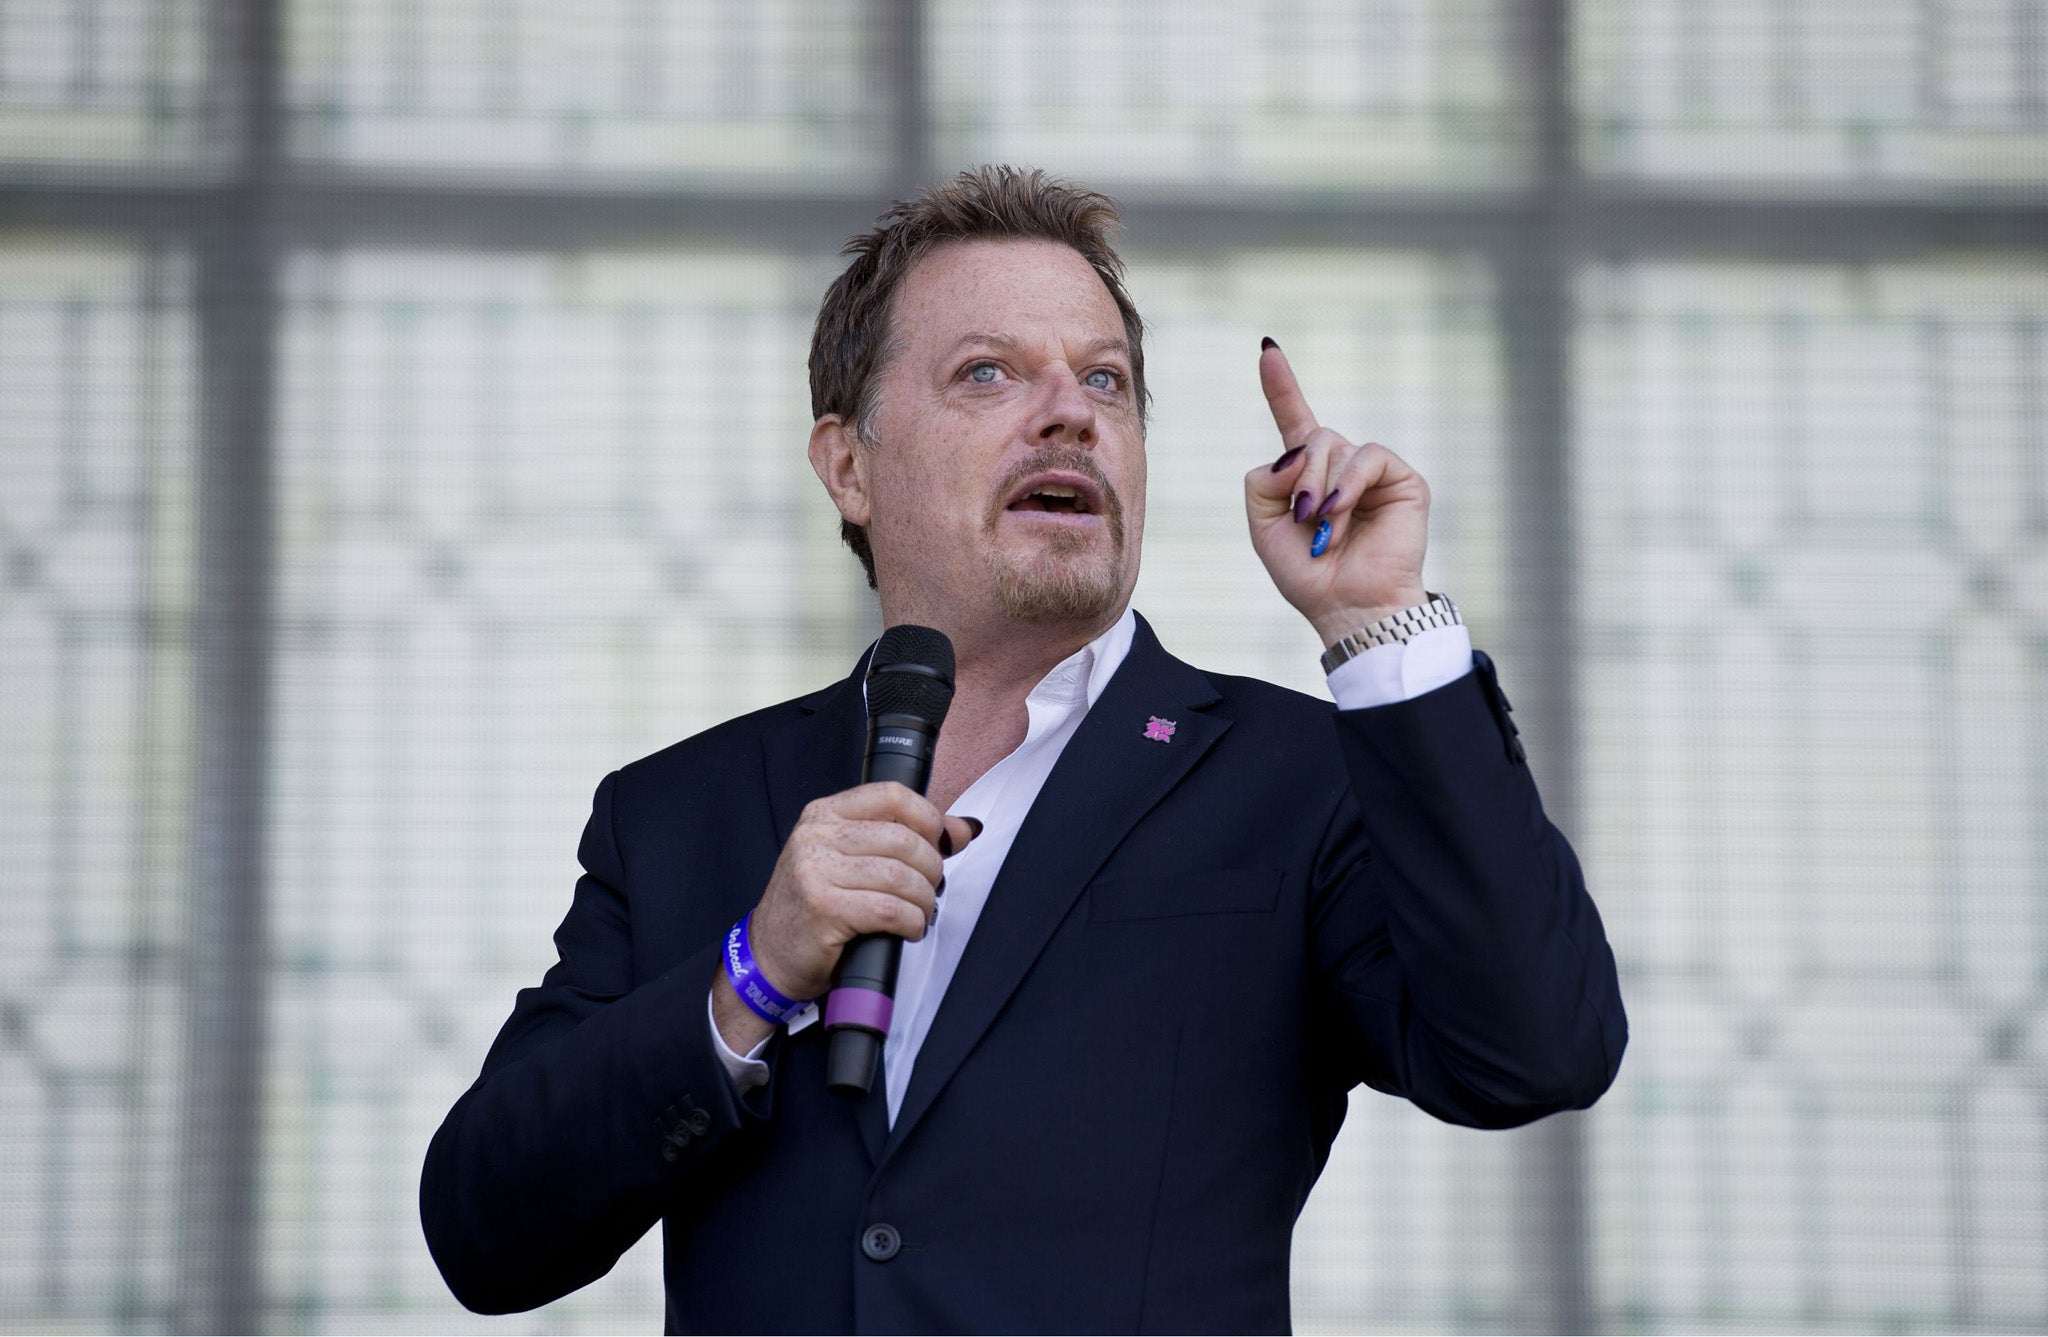 Eddie Izzard performs at the 'Go Local' festival at the Queen Elizabeth Olympic Park, July 2013